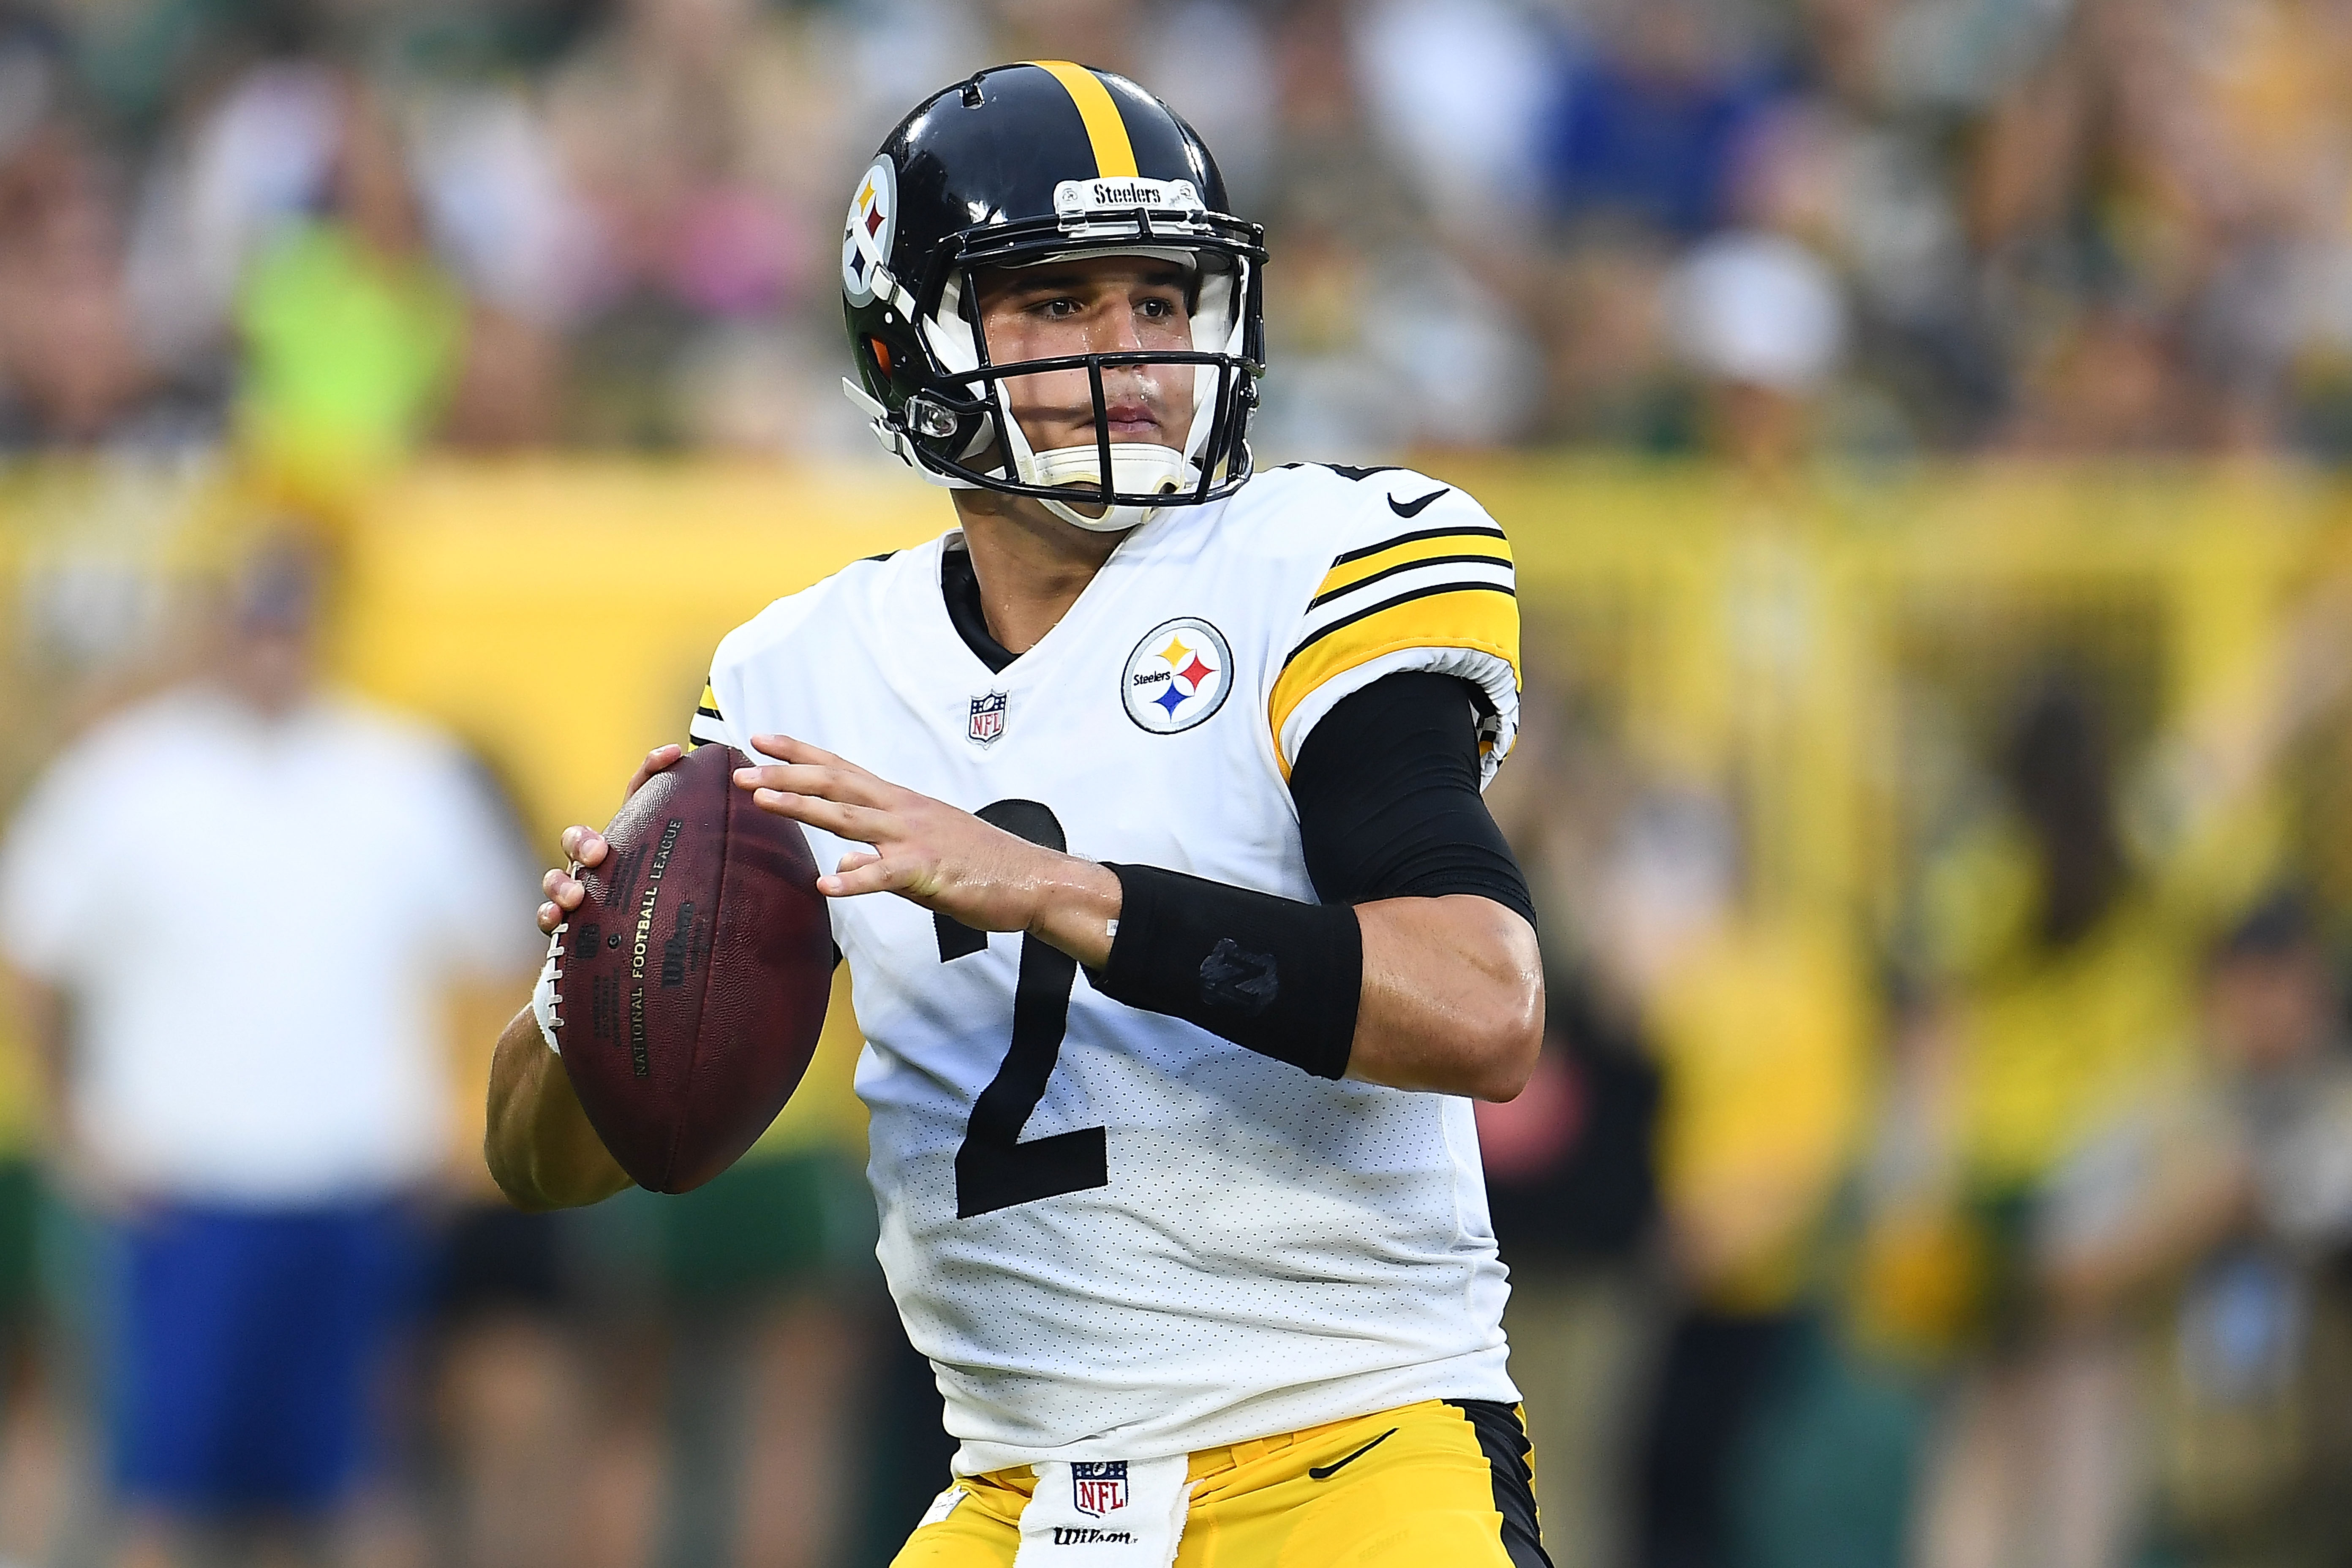 Mason Rudolph is likely to open 2002 as the Steelers' starting quarterback